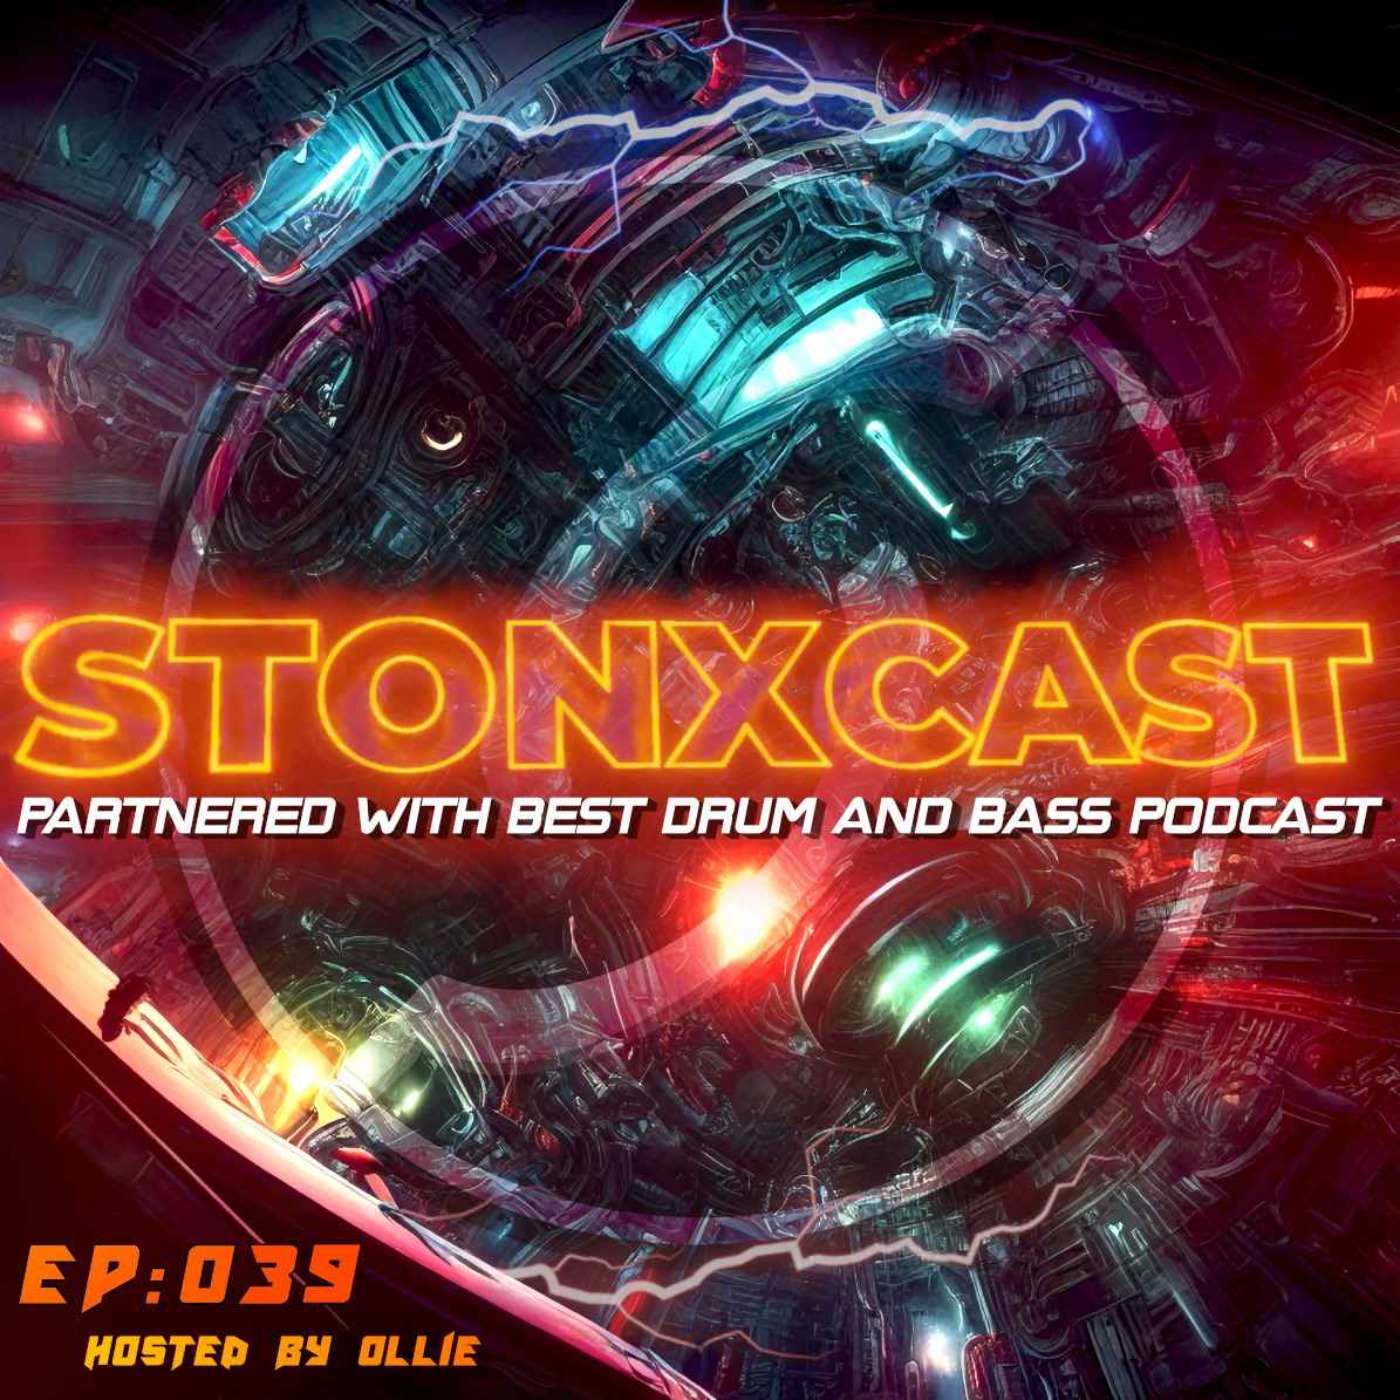 Stonxcast EP:039 - Hosted by Ollie Artwork